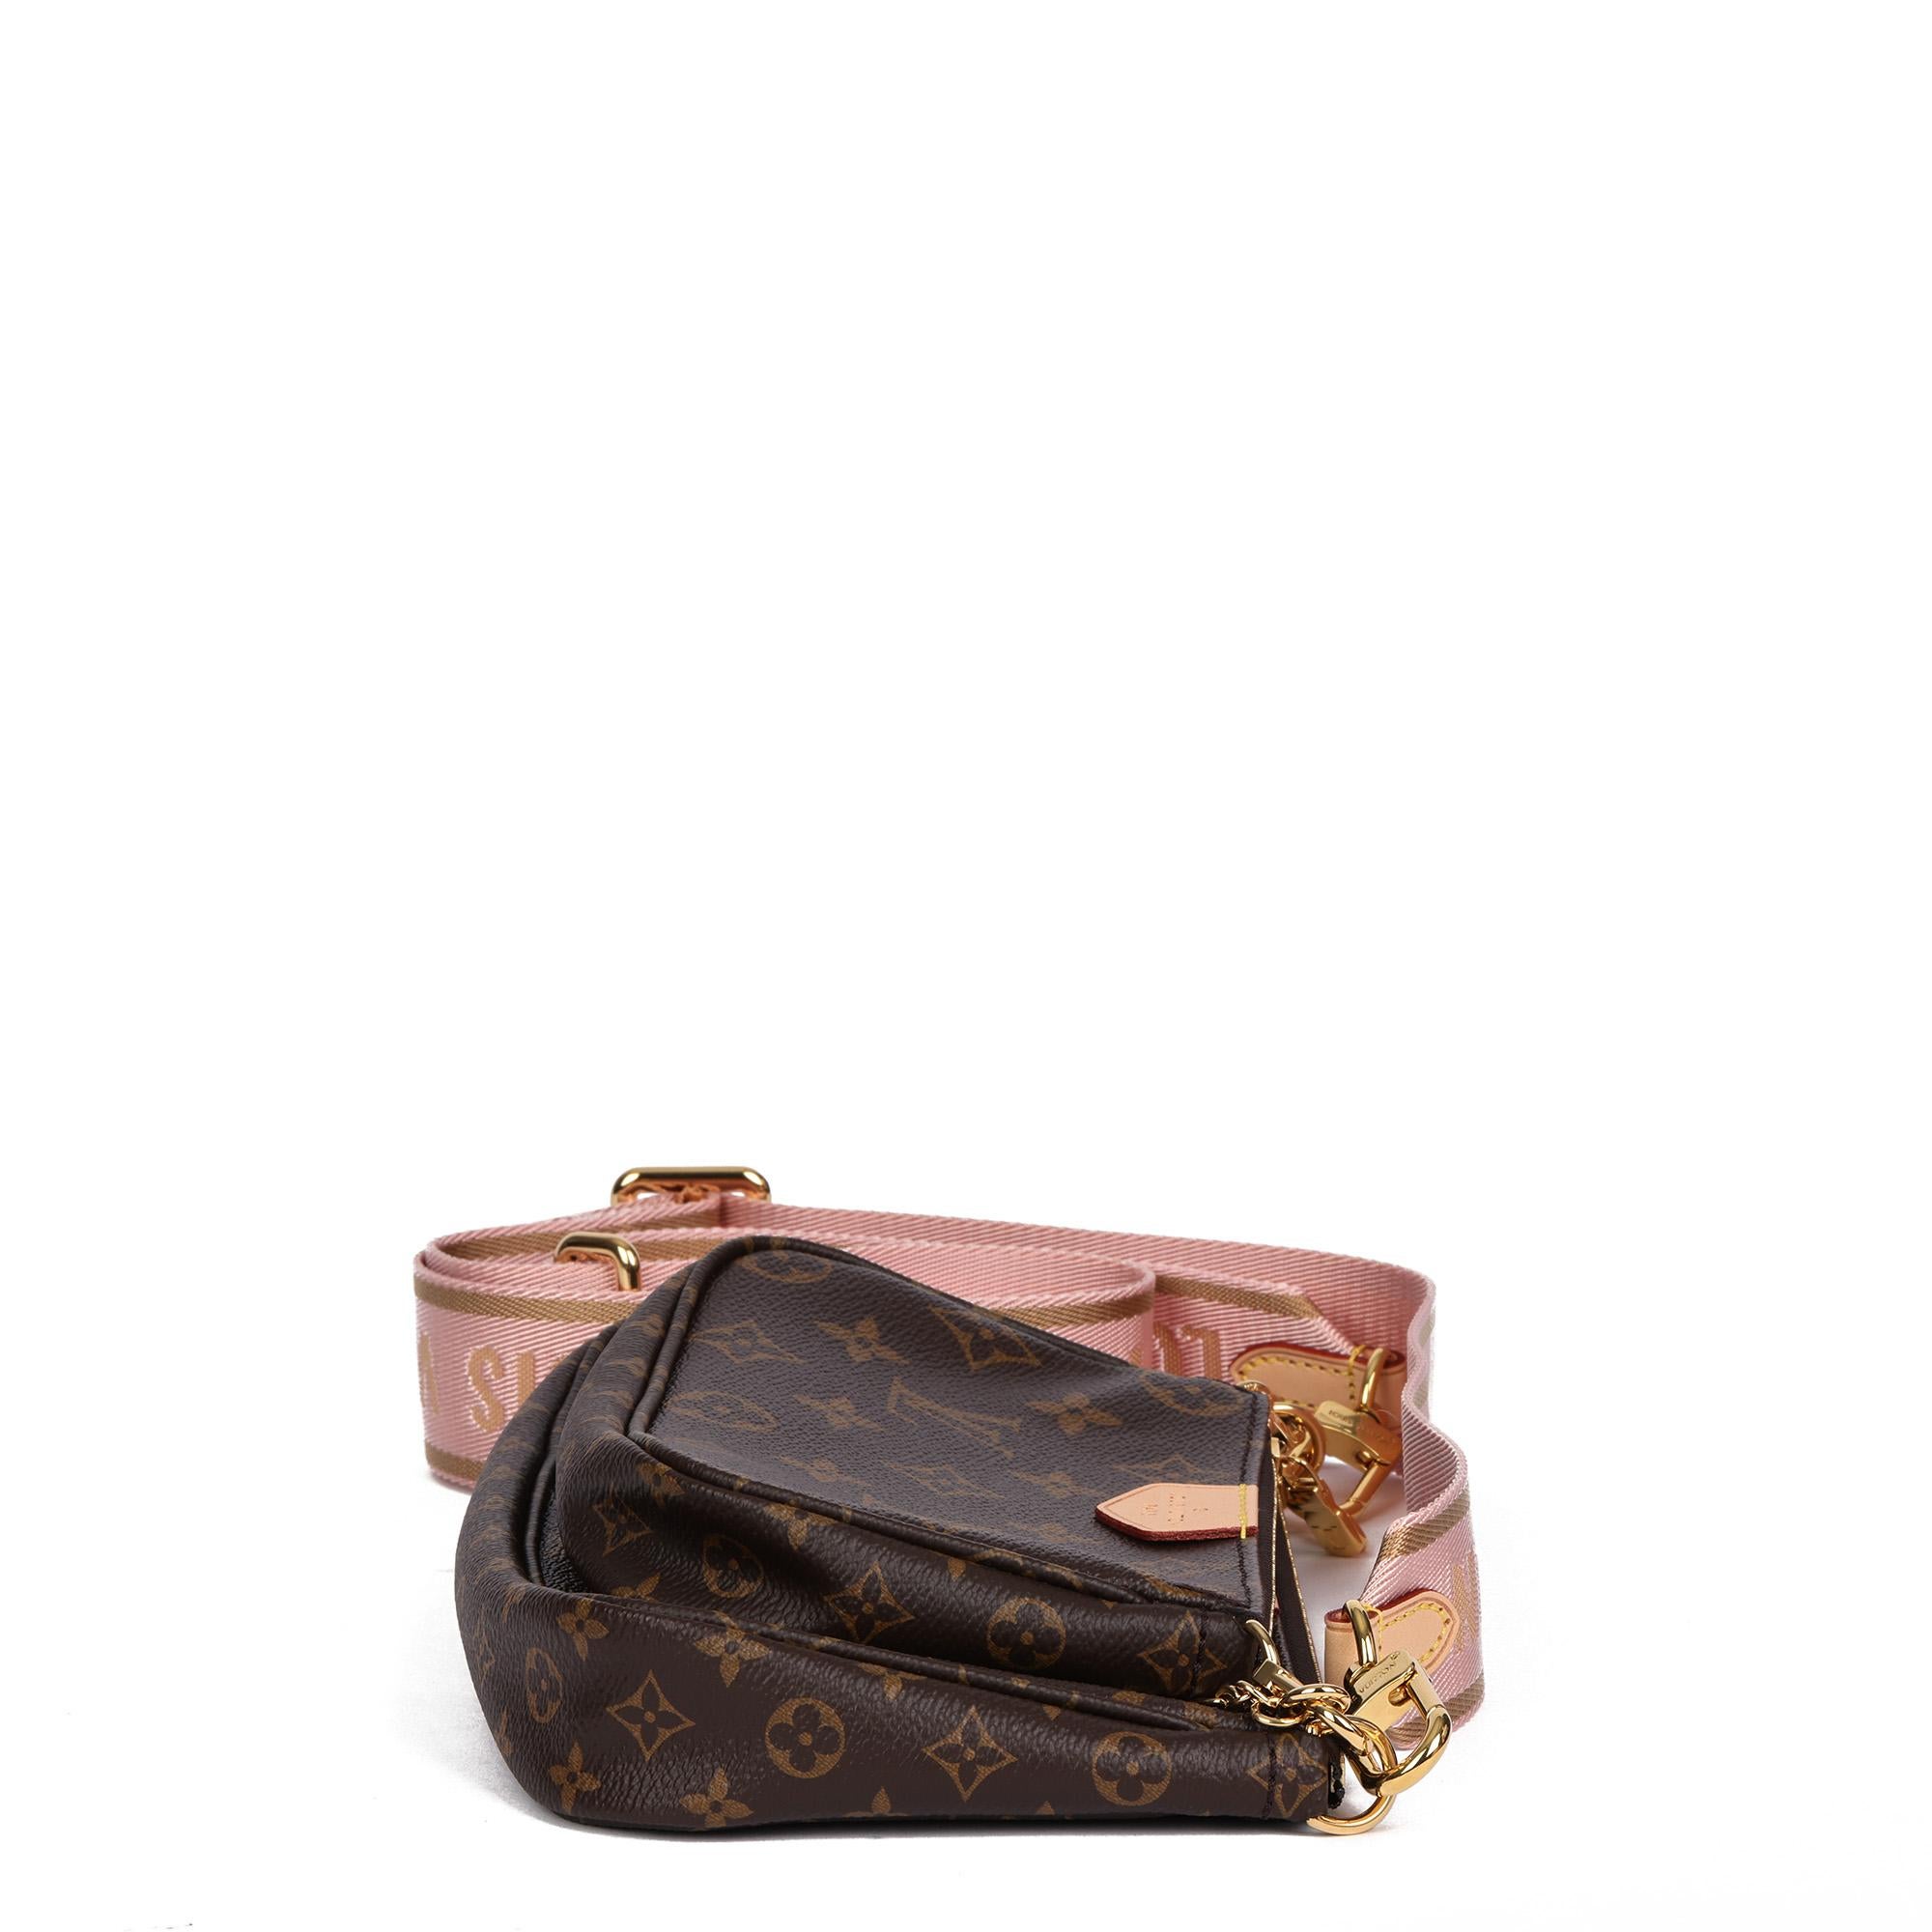 louis vuitton bag with pink strap